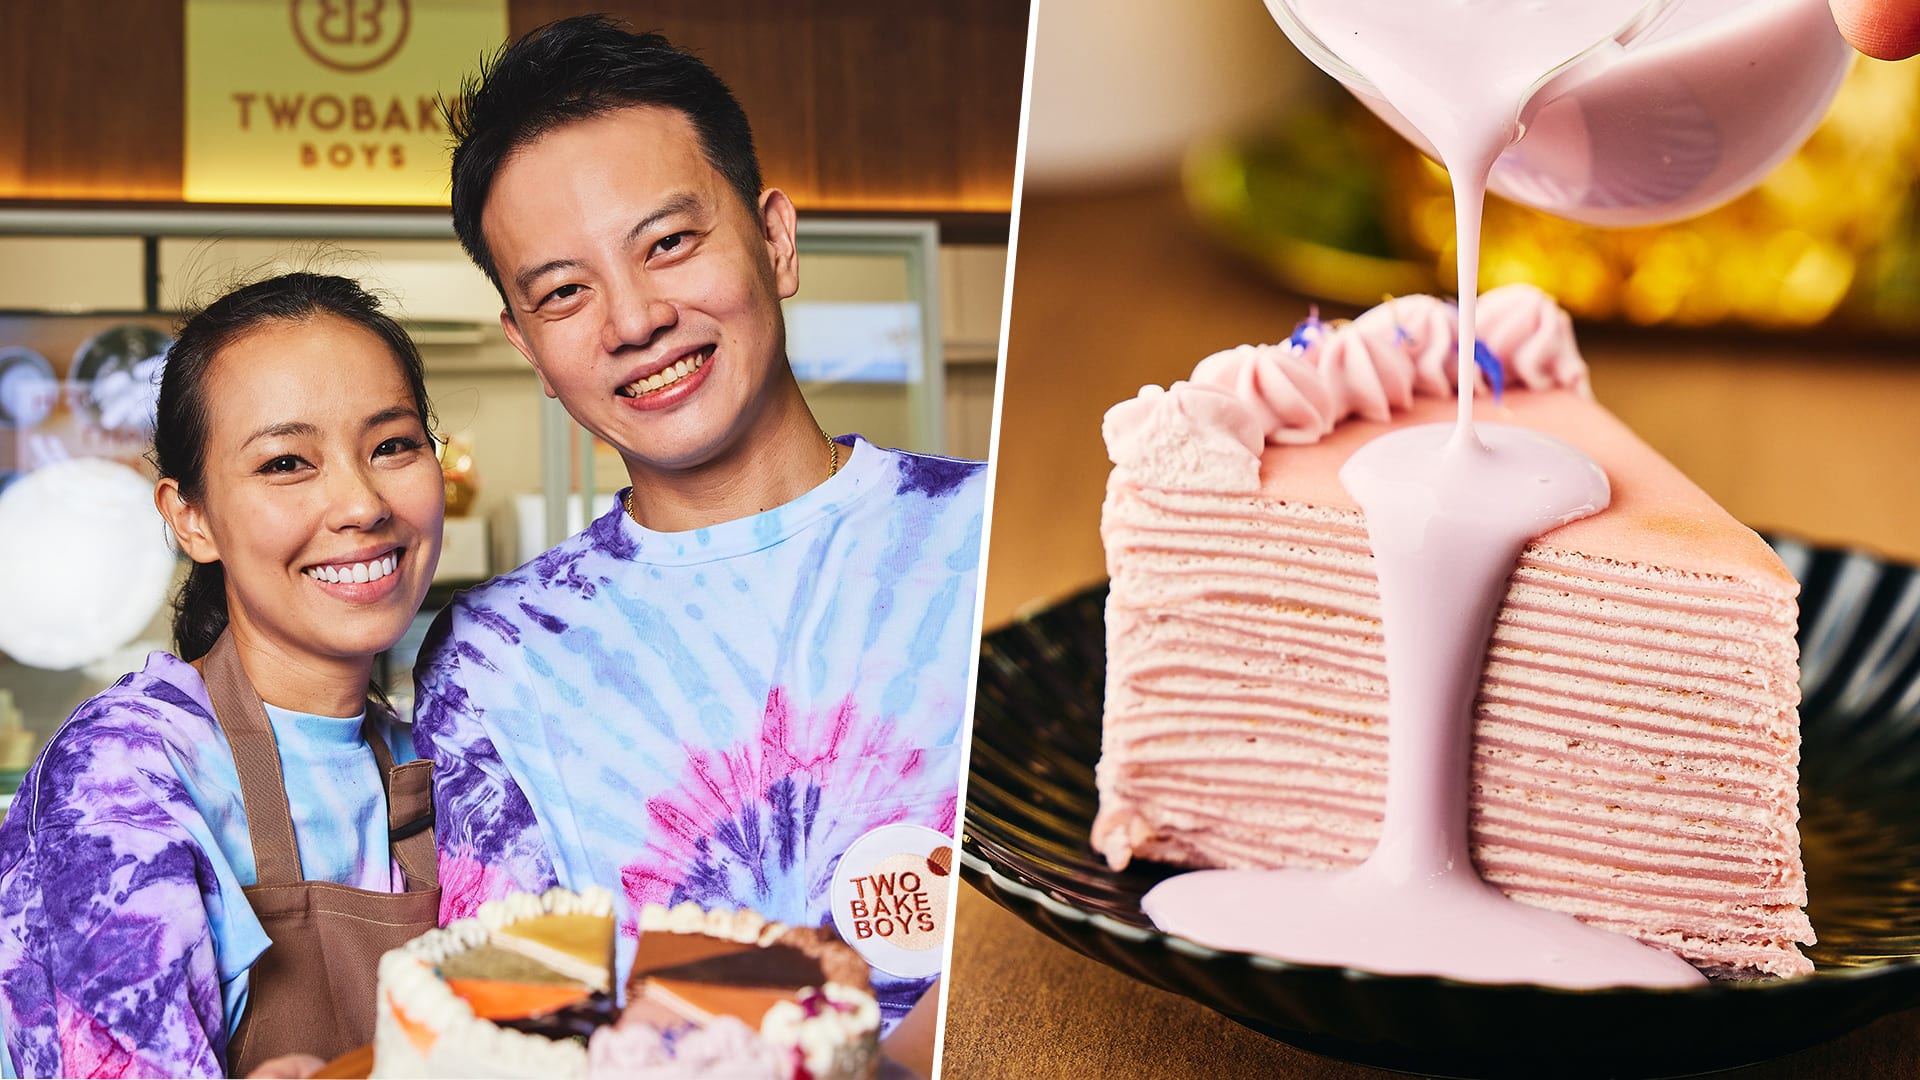 Grounded Airline Worker's Crepe Cake Home Biz So Good, She Opens Takeout Shop